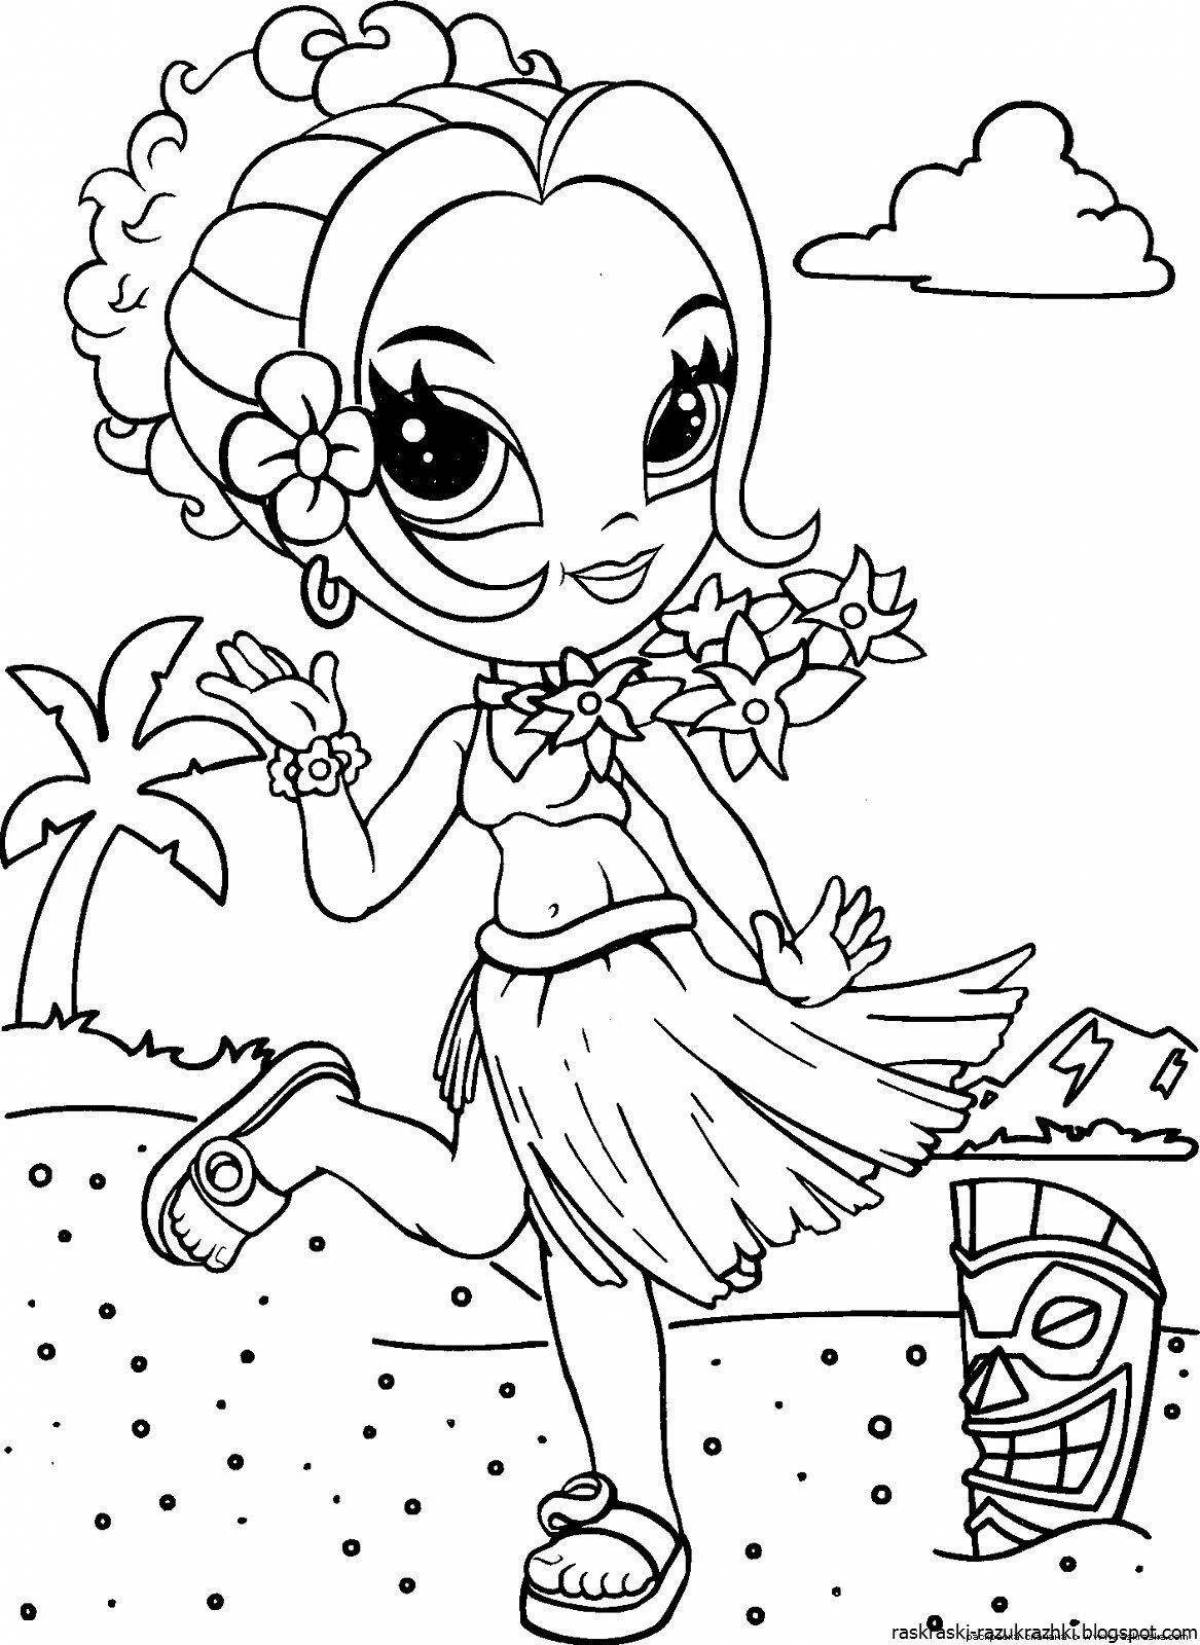 Fun coloring book for 8 year old girls